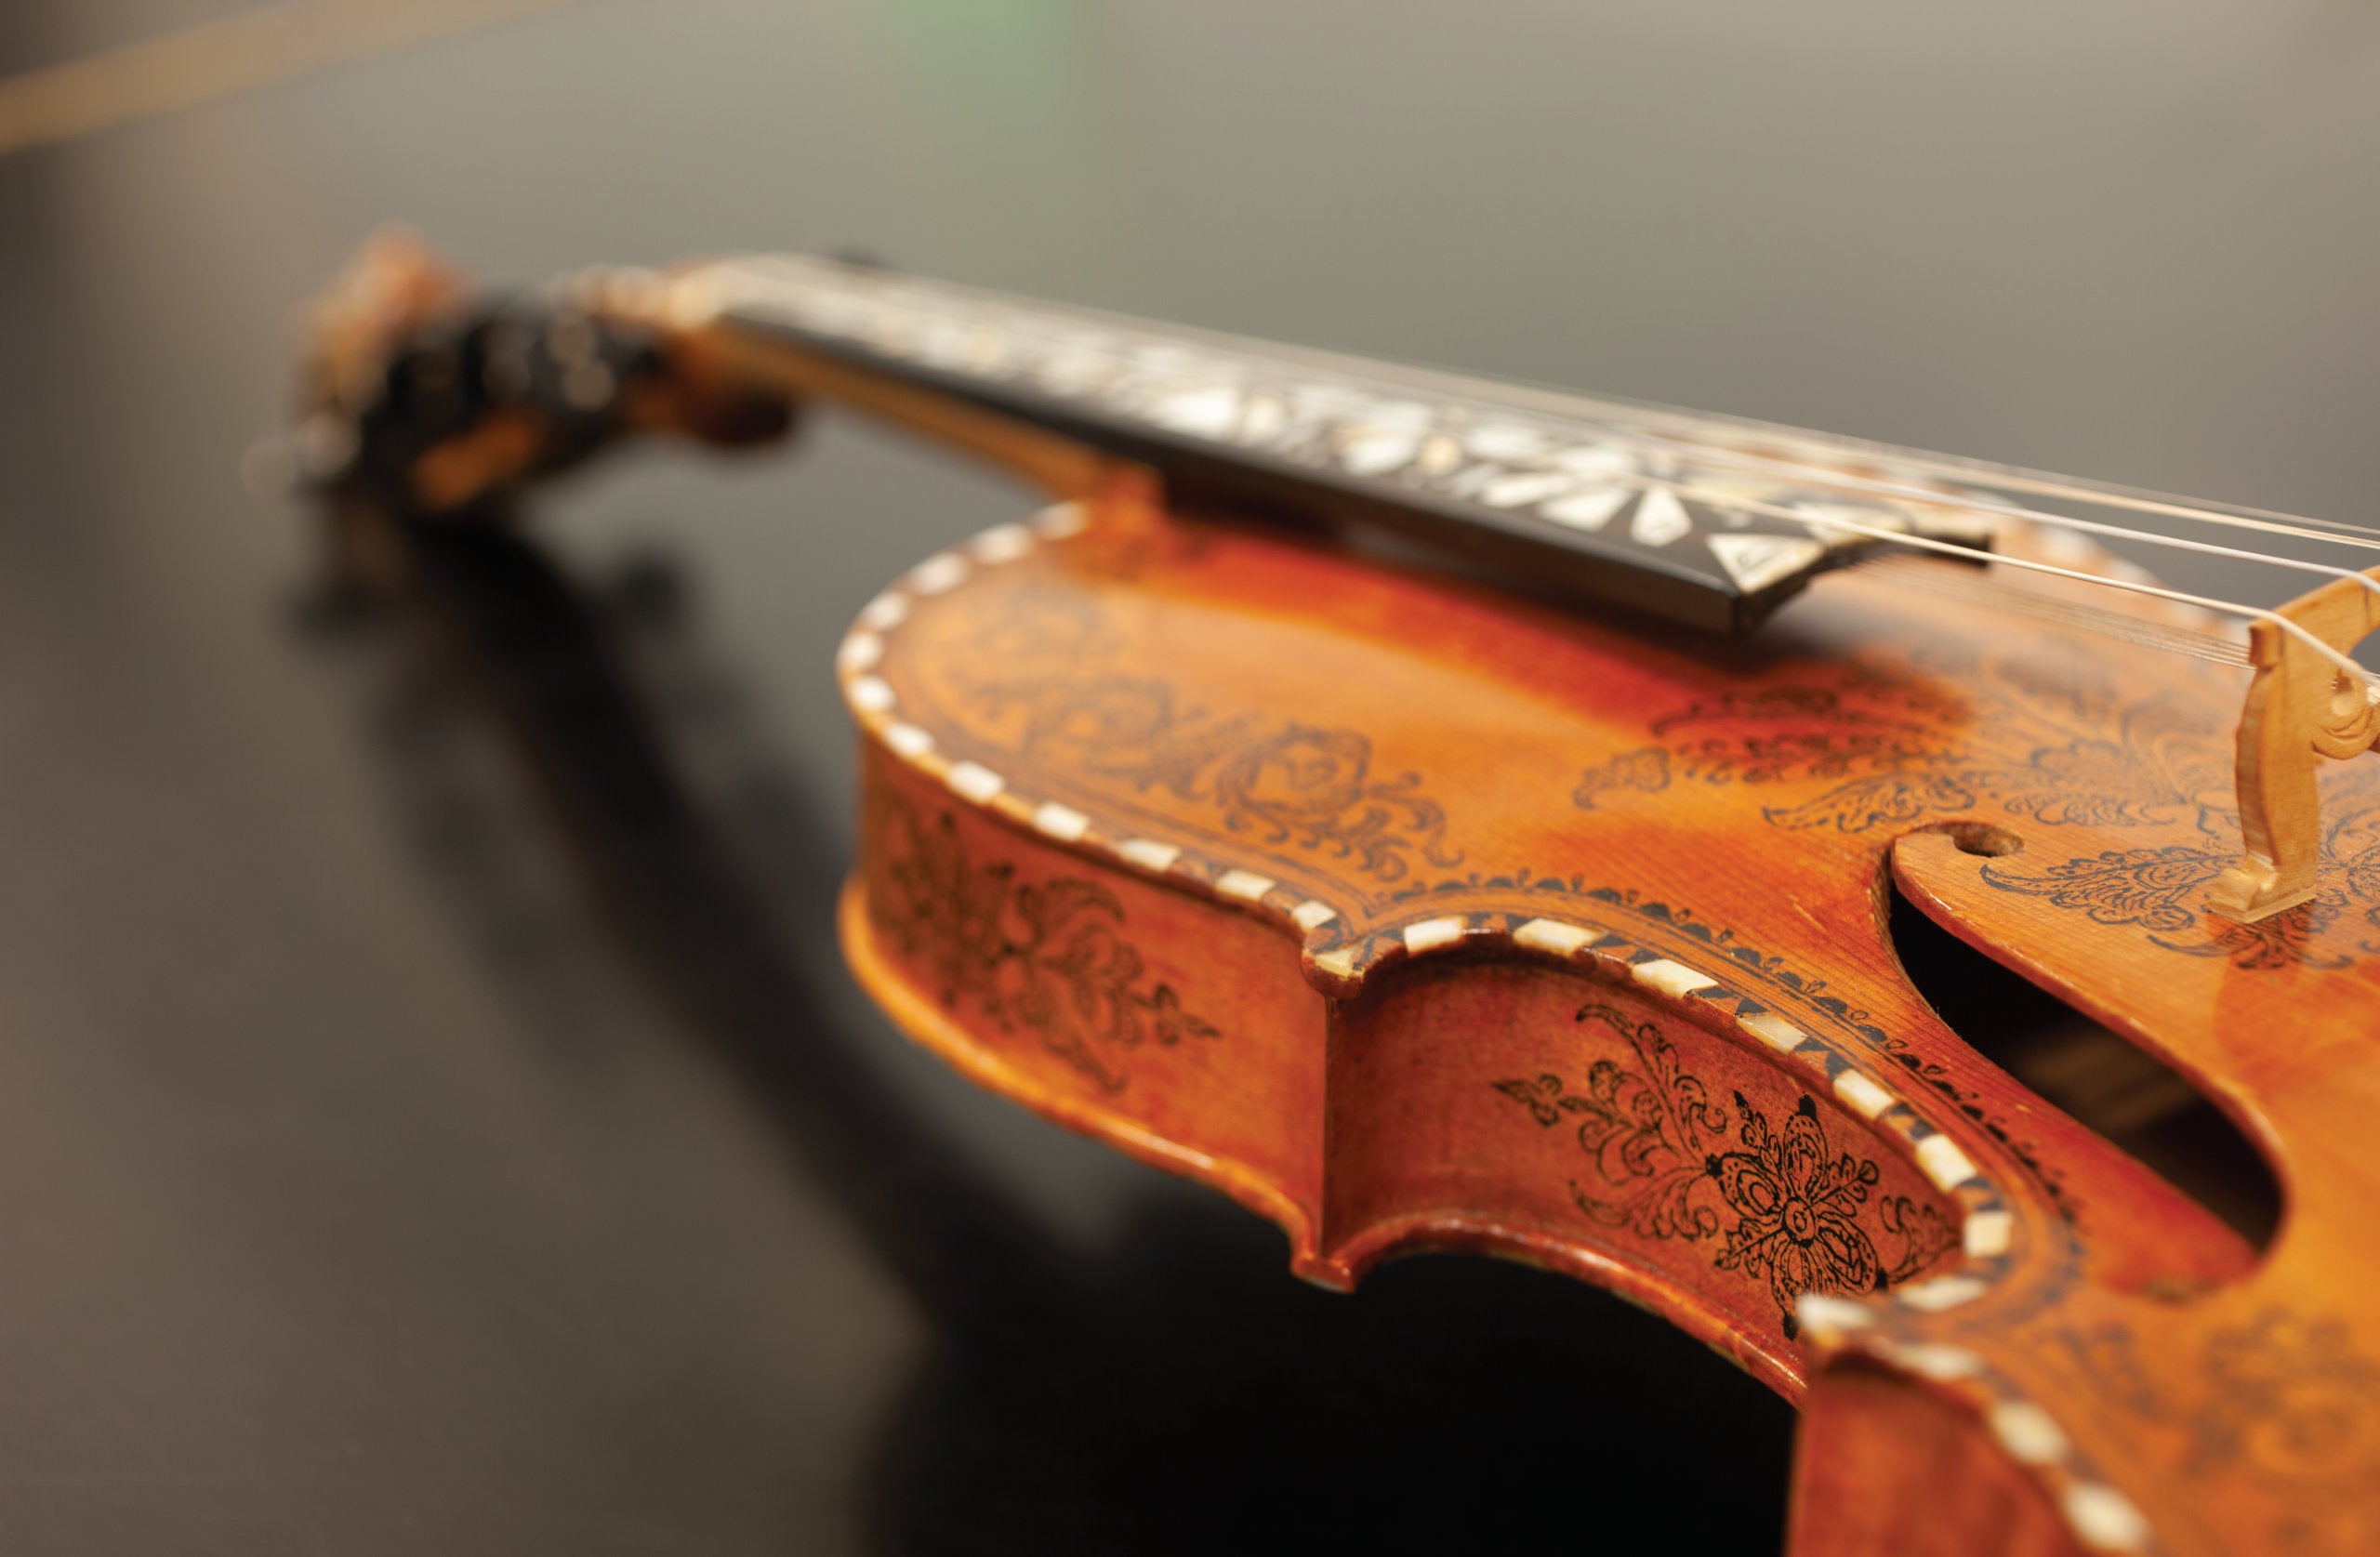 A close-up shot of violin with intricate wooden inlay